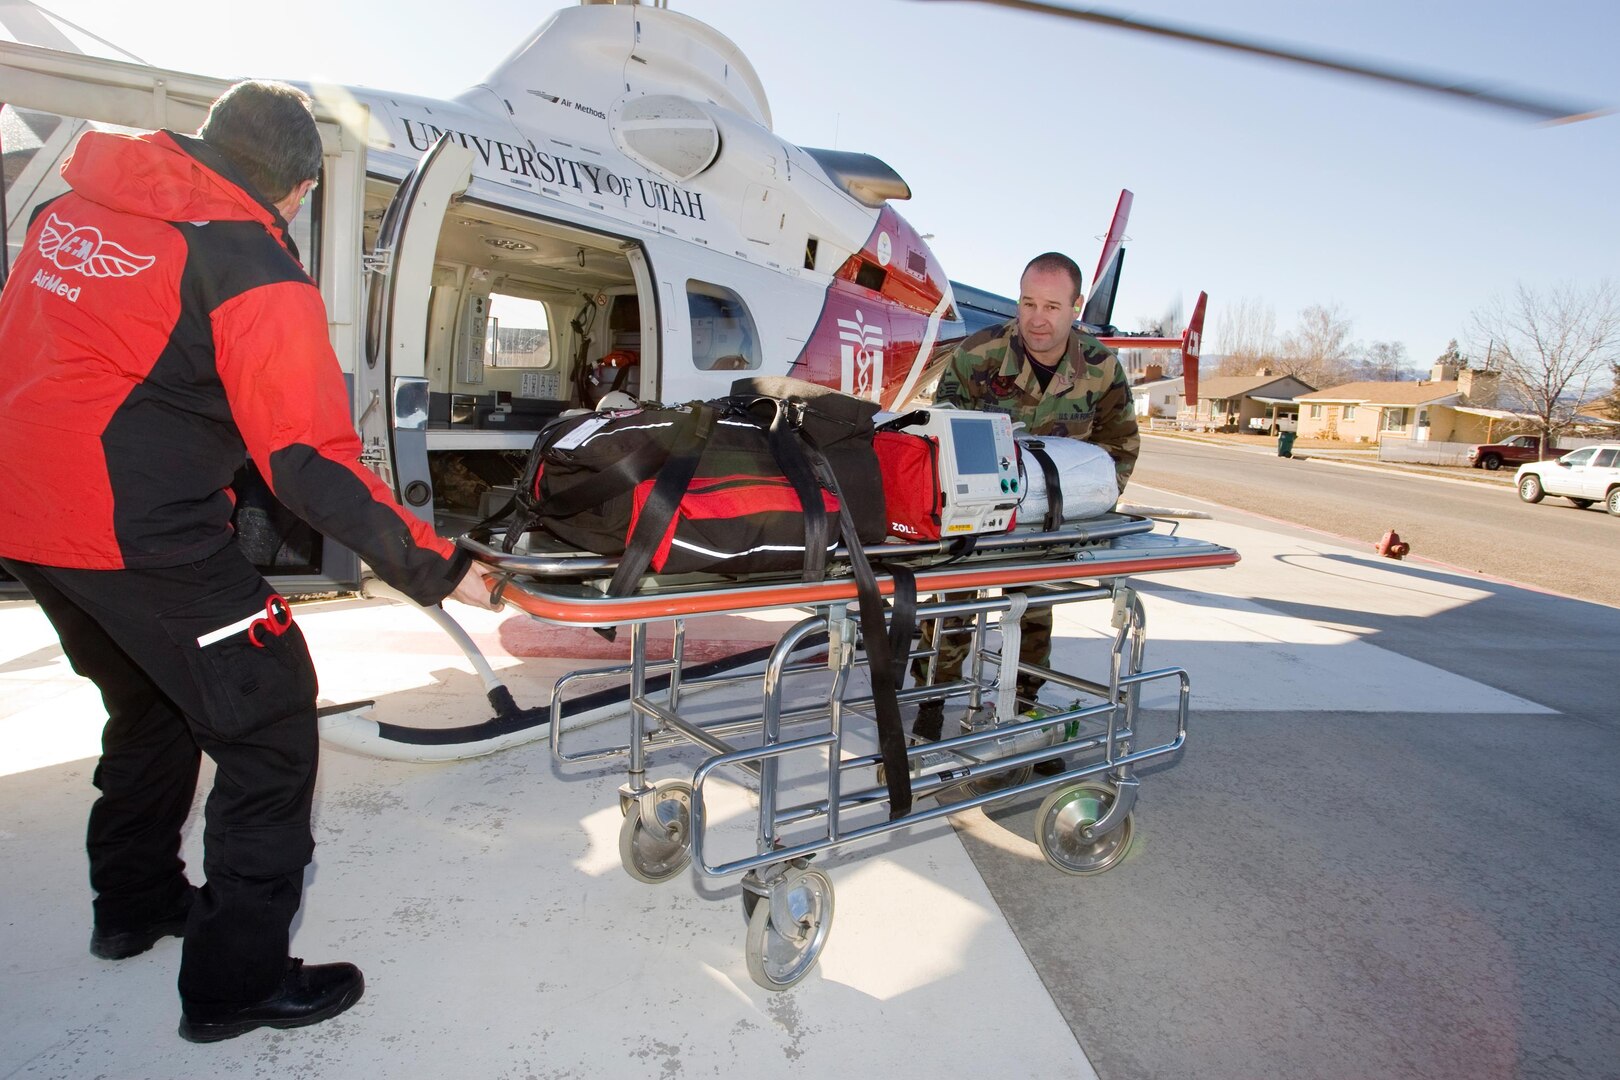 Staff Sgt. Alan Reynolds of the 151st Medical Group of the Utah Air National Guard helps air paramedic Tom Robertson unload equipment from a Bell 430 AirMed helicopter into the Vernal, Utah hospital. Sergeant Reynolds is one of 19 Utah Air Guard medics, who are participating in a special ride-along program with the University of Utah AirMed unit.